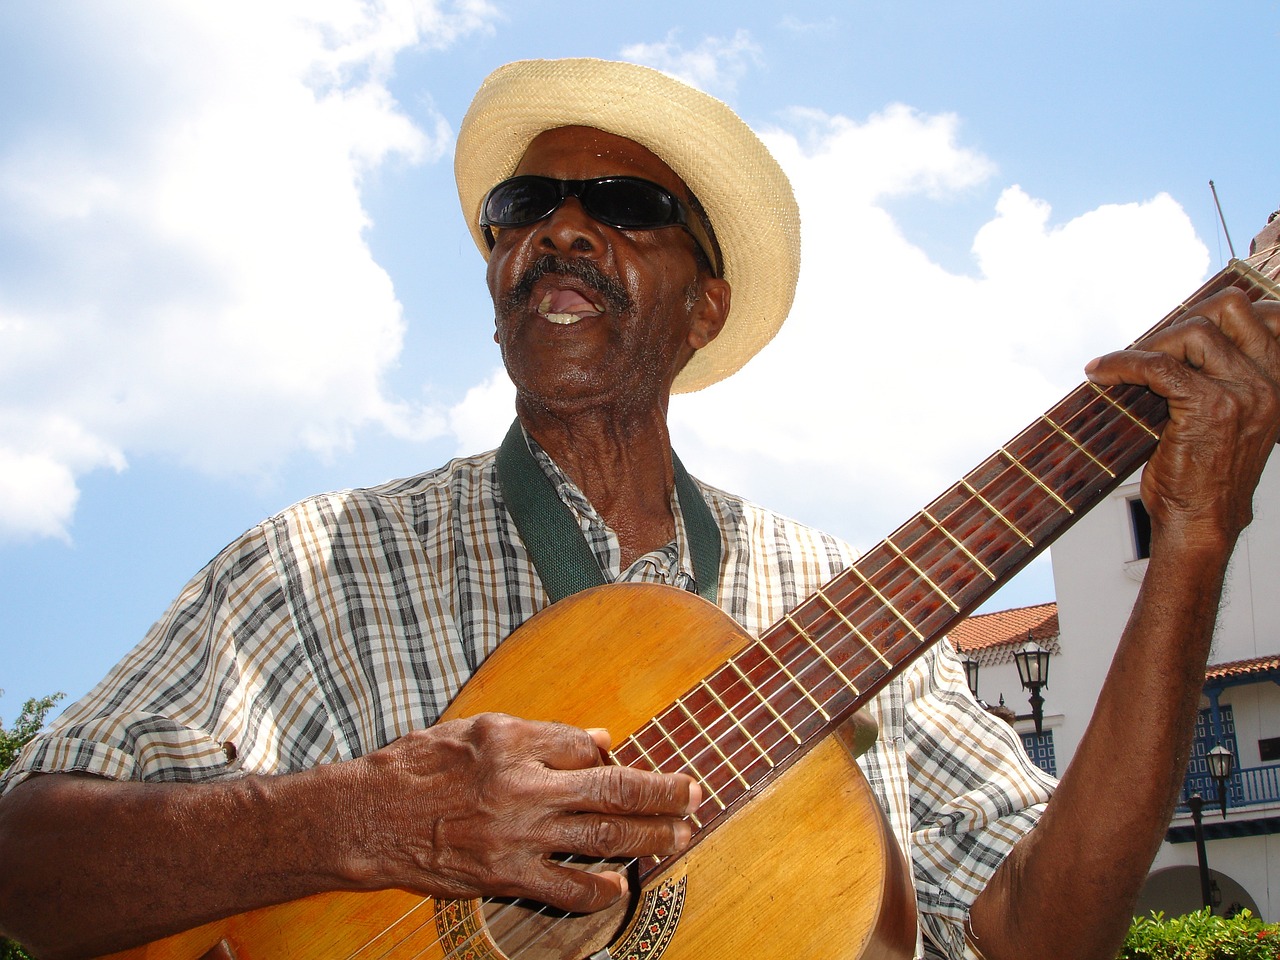 a man with a hat and sunglasses holding a guitar, flickr, jamaican, an 80 year old man, square, on a sunny day